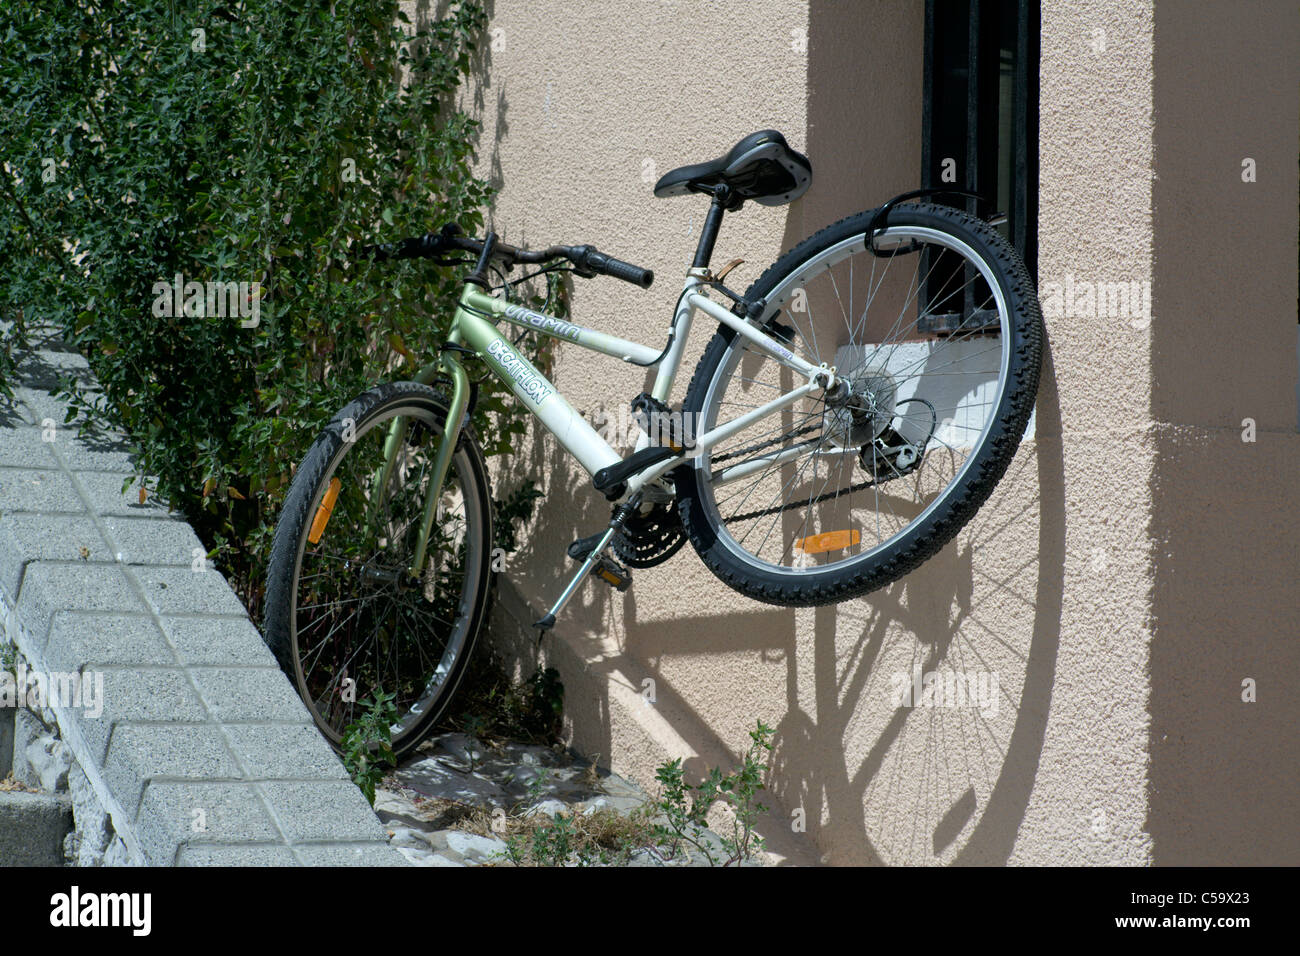 Bicycle chained to window bars in bright sunlight Stock Photo